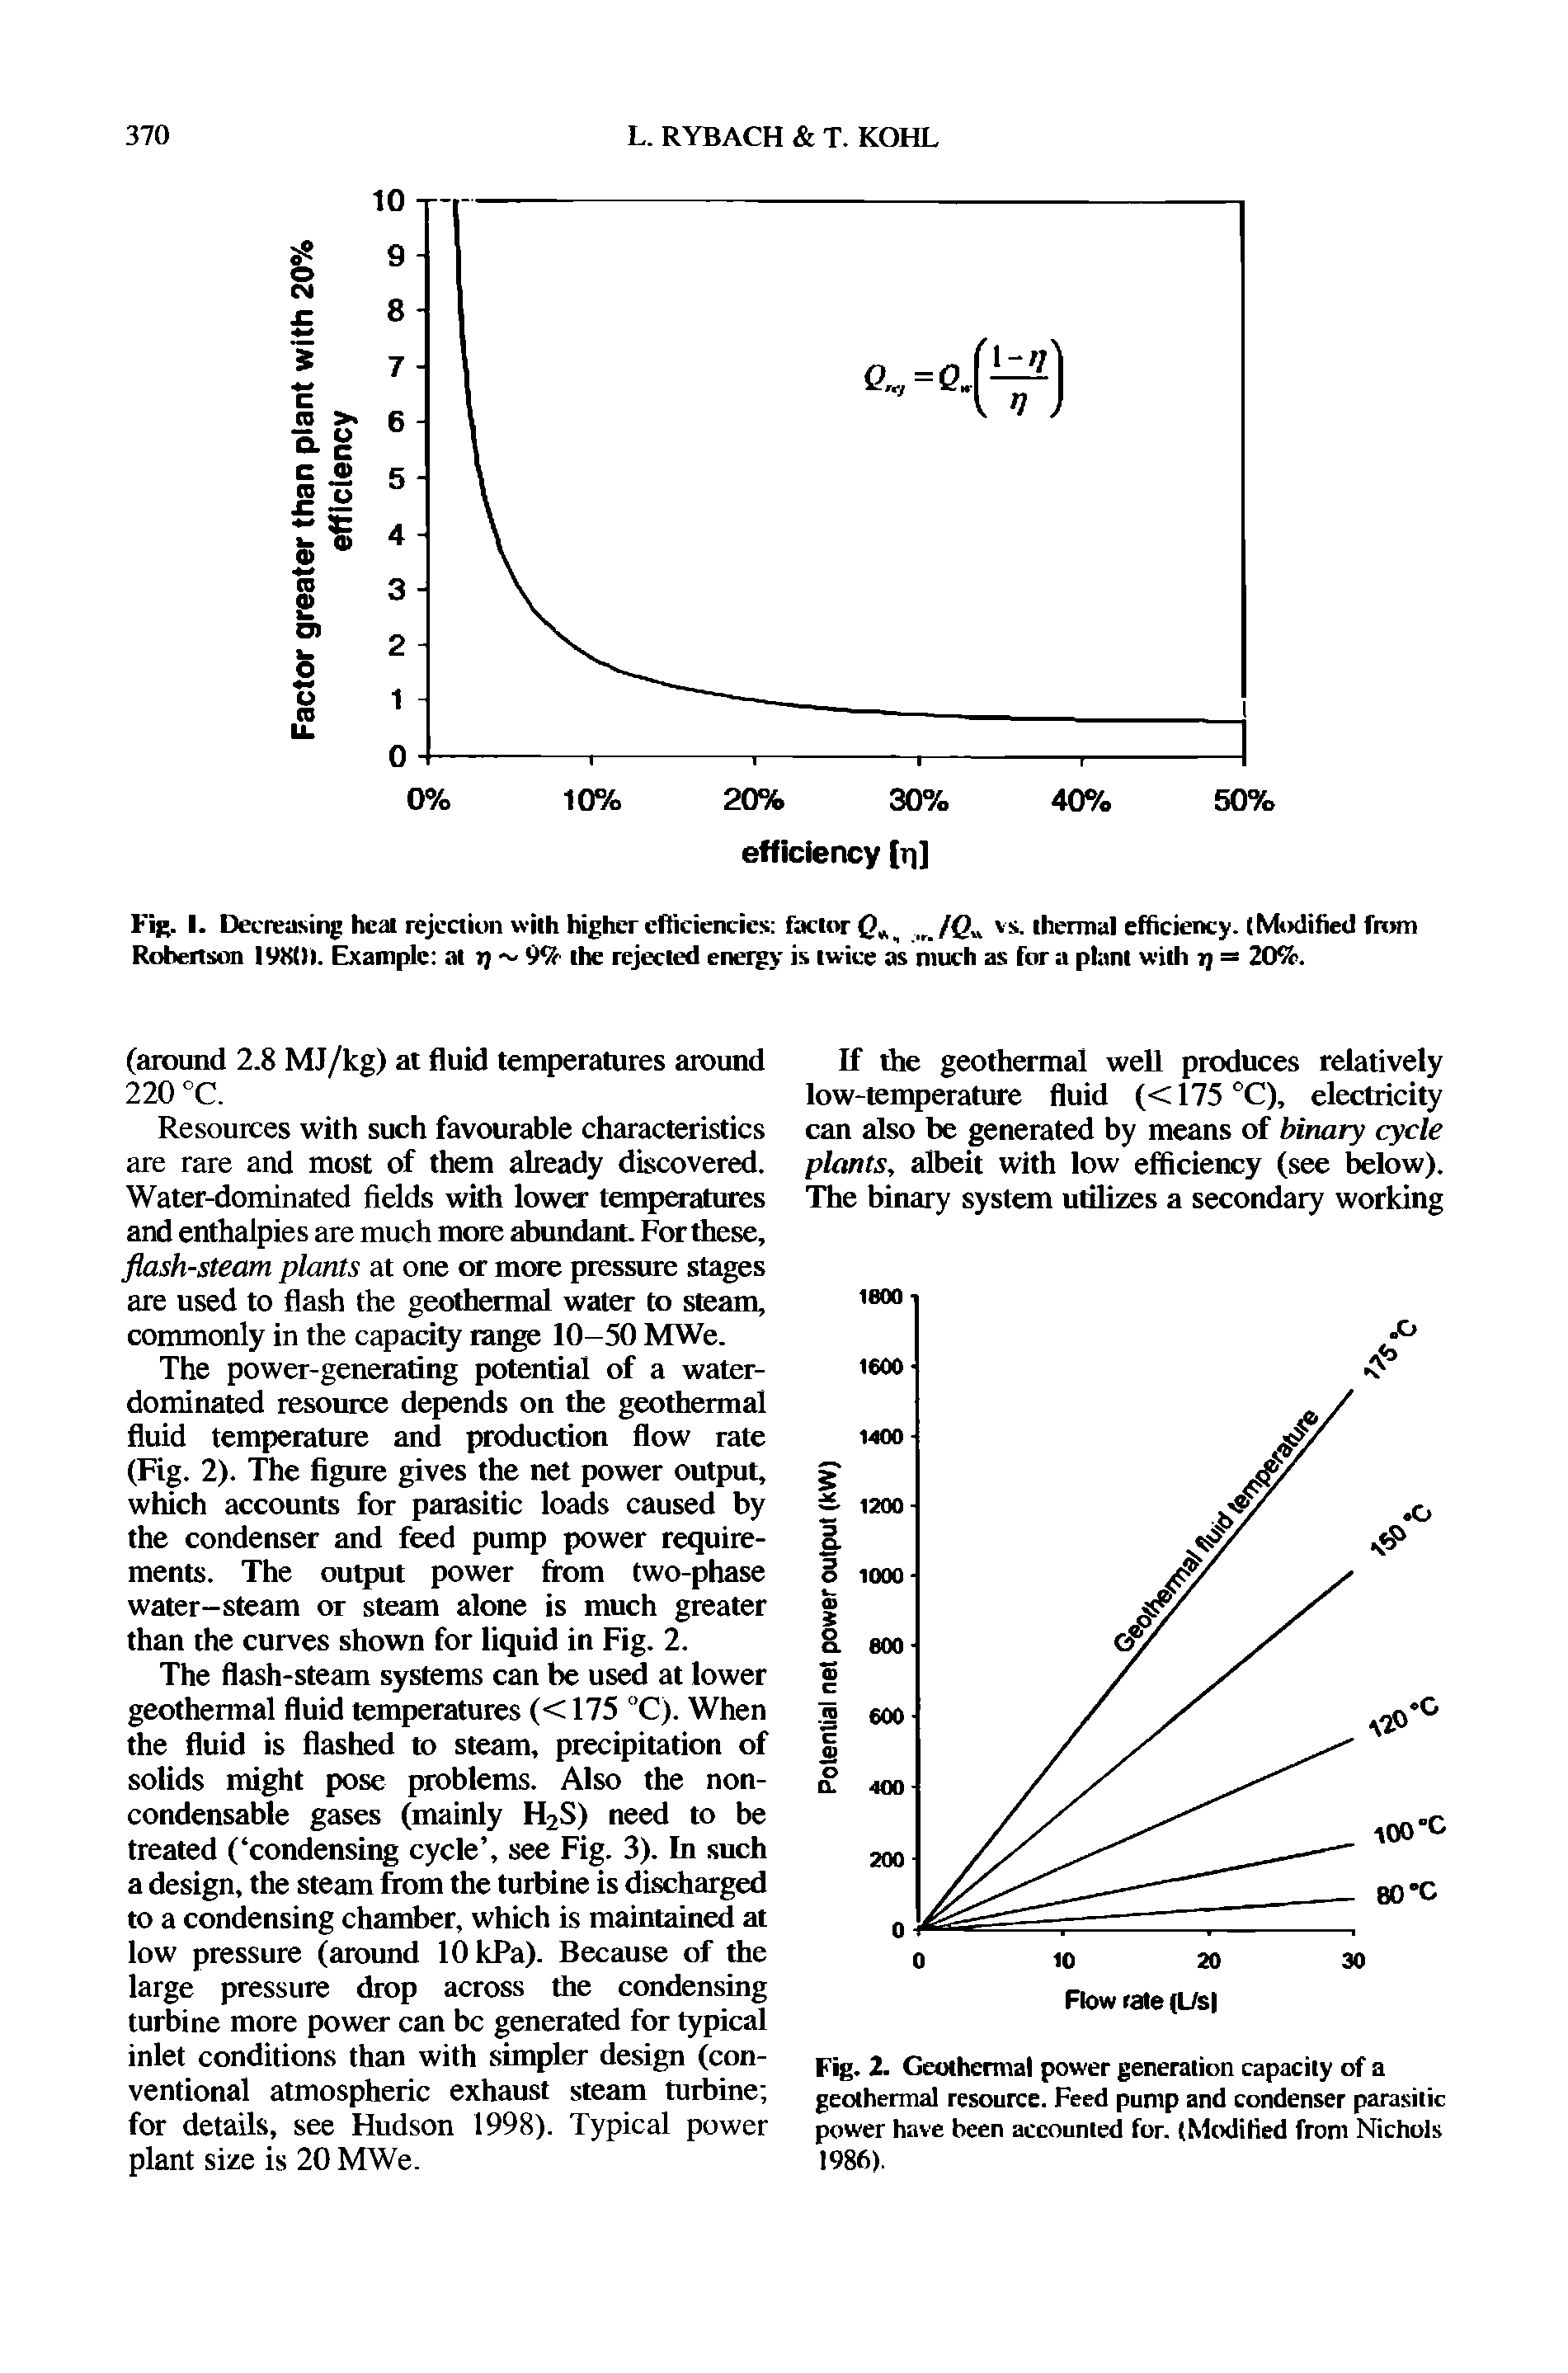 Fig. 2. Geothermal power generation capacity of a geothermal resource. Feed pump and condenser parasitic power have been accounted for. (Modified from Nichols 1986).